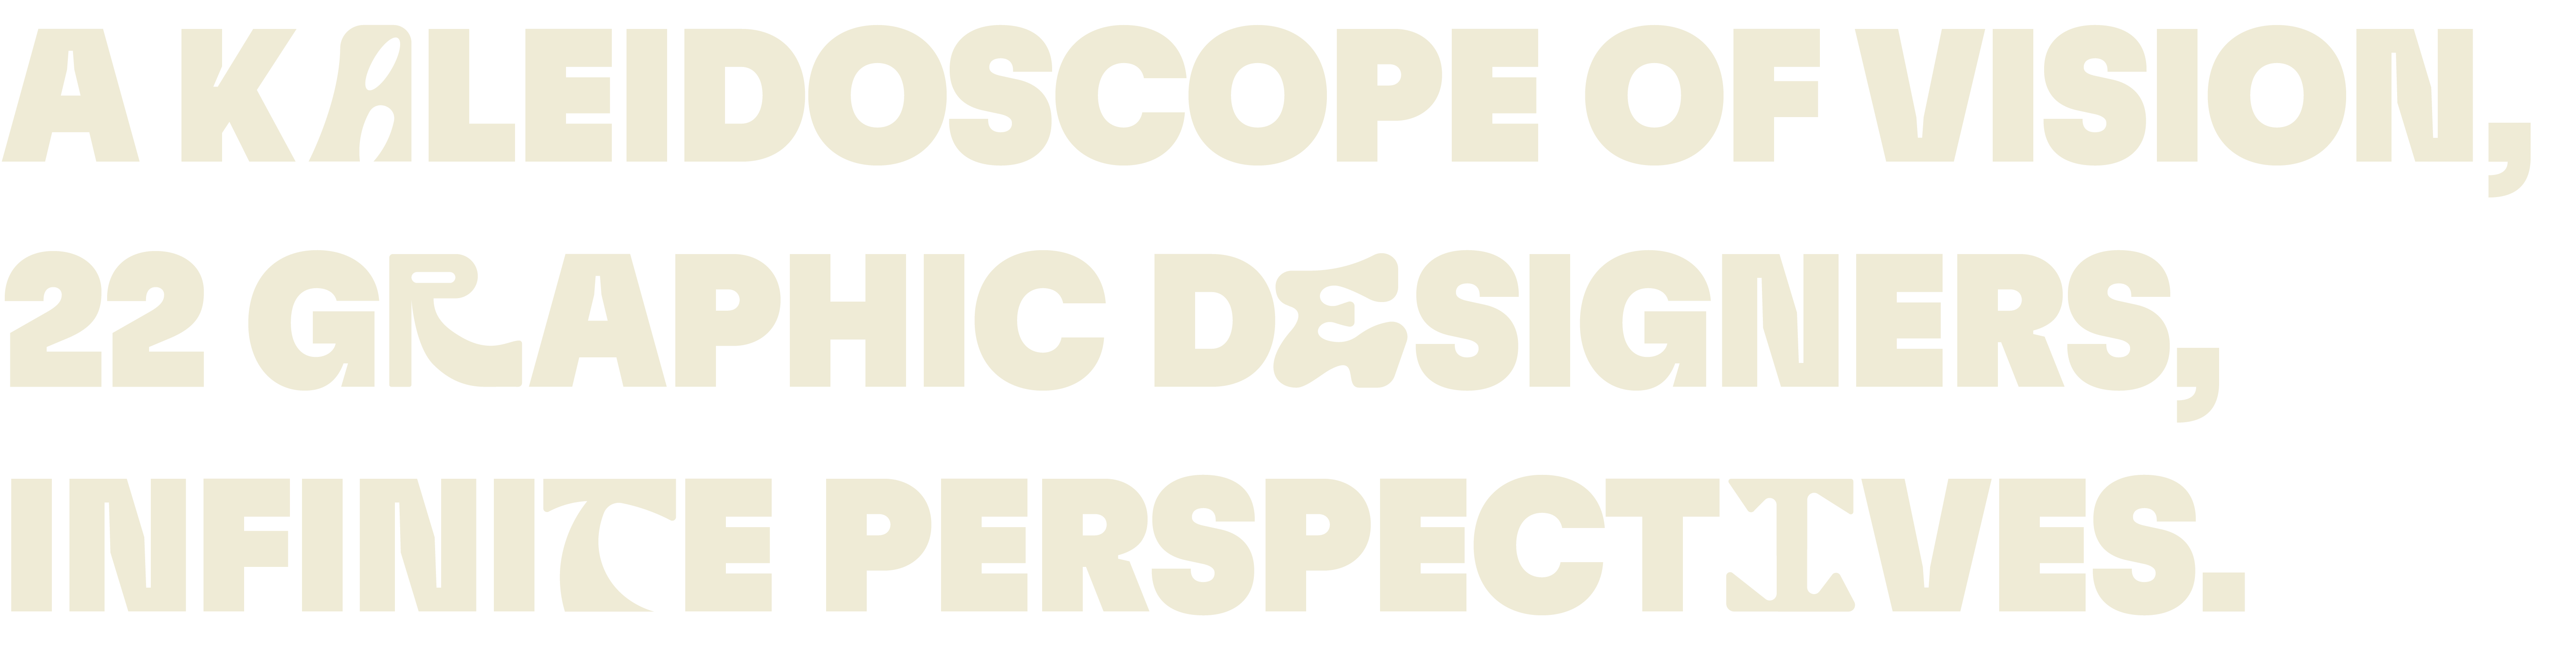 a kalidescope of vision